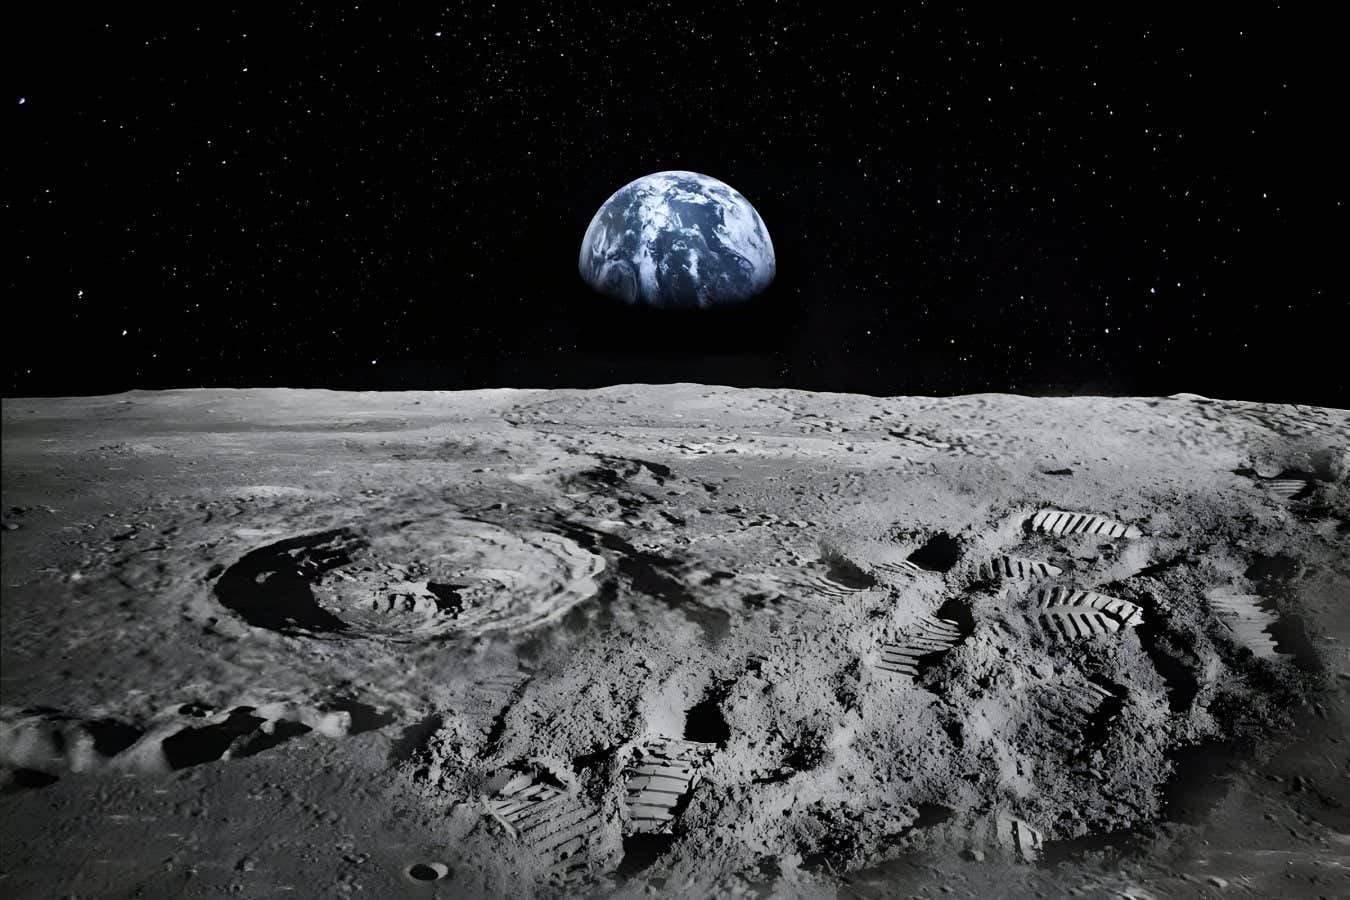 Moon bases will need to be 3 metres underground to avoid radiation